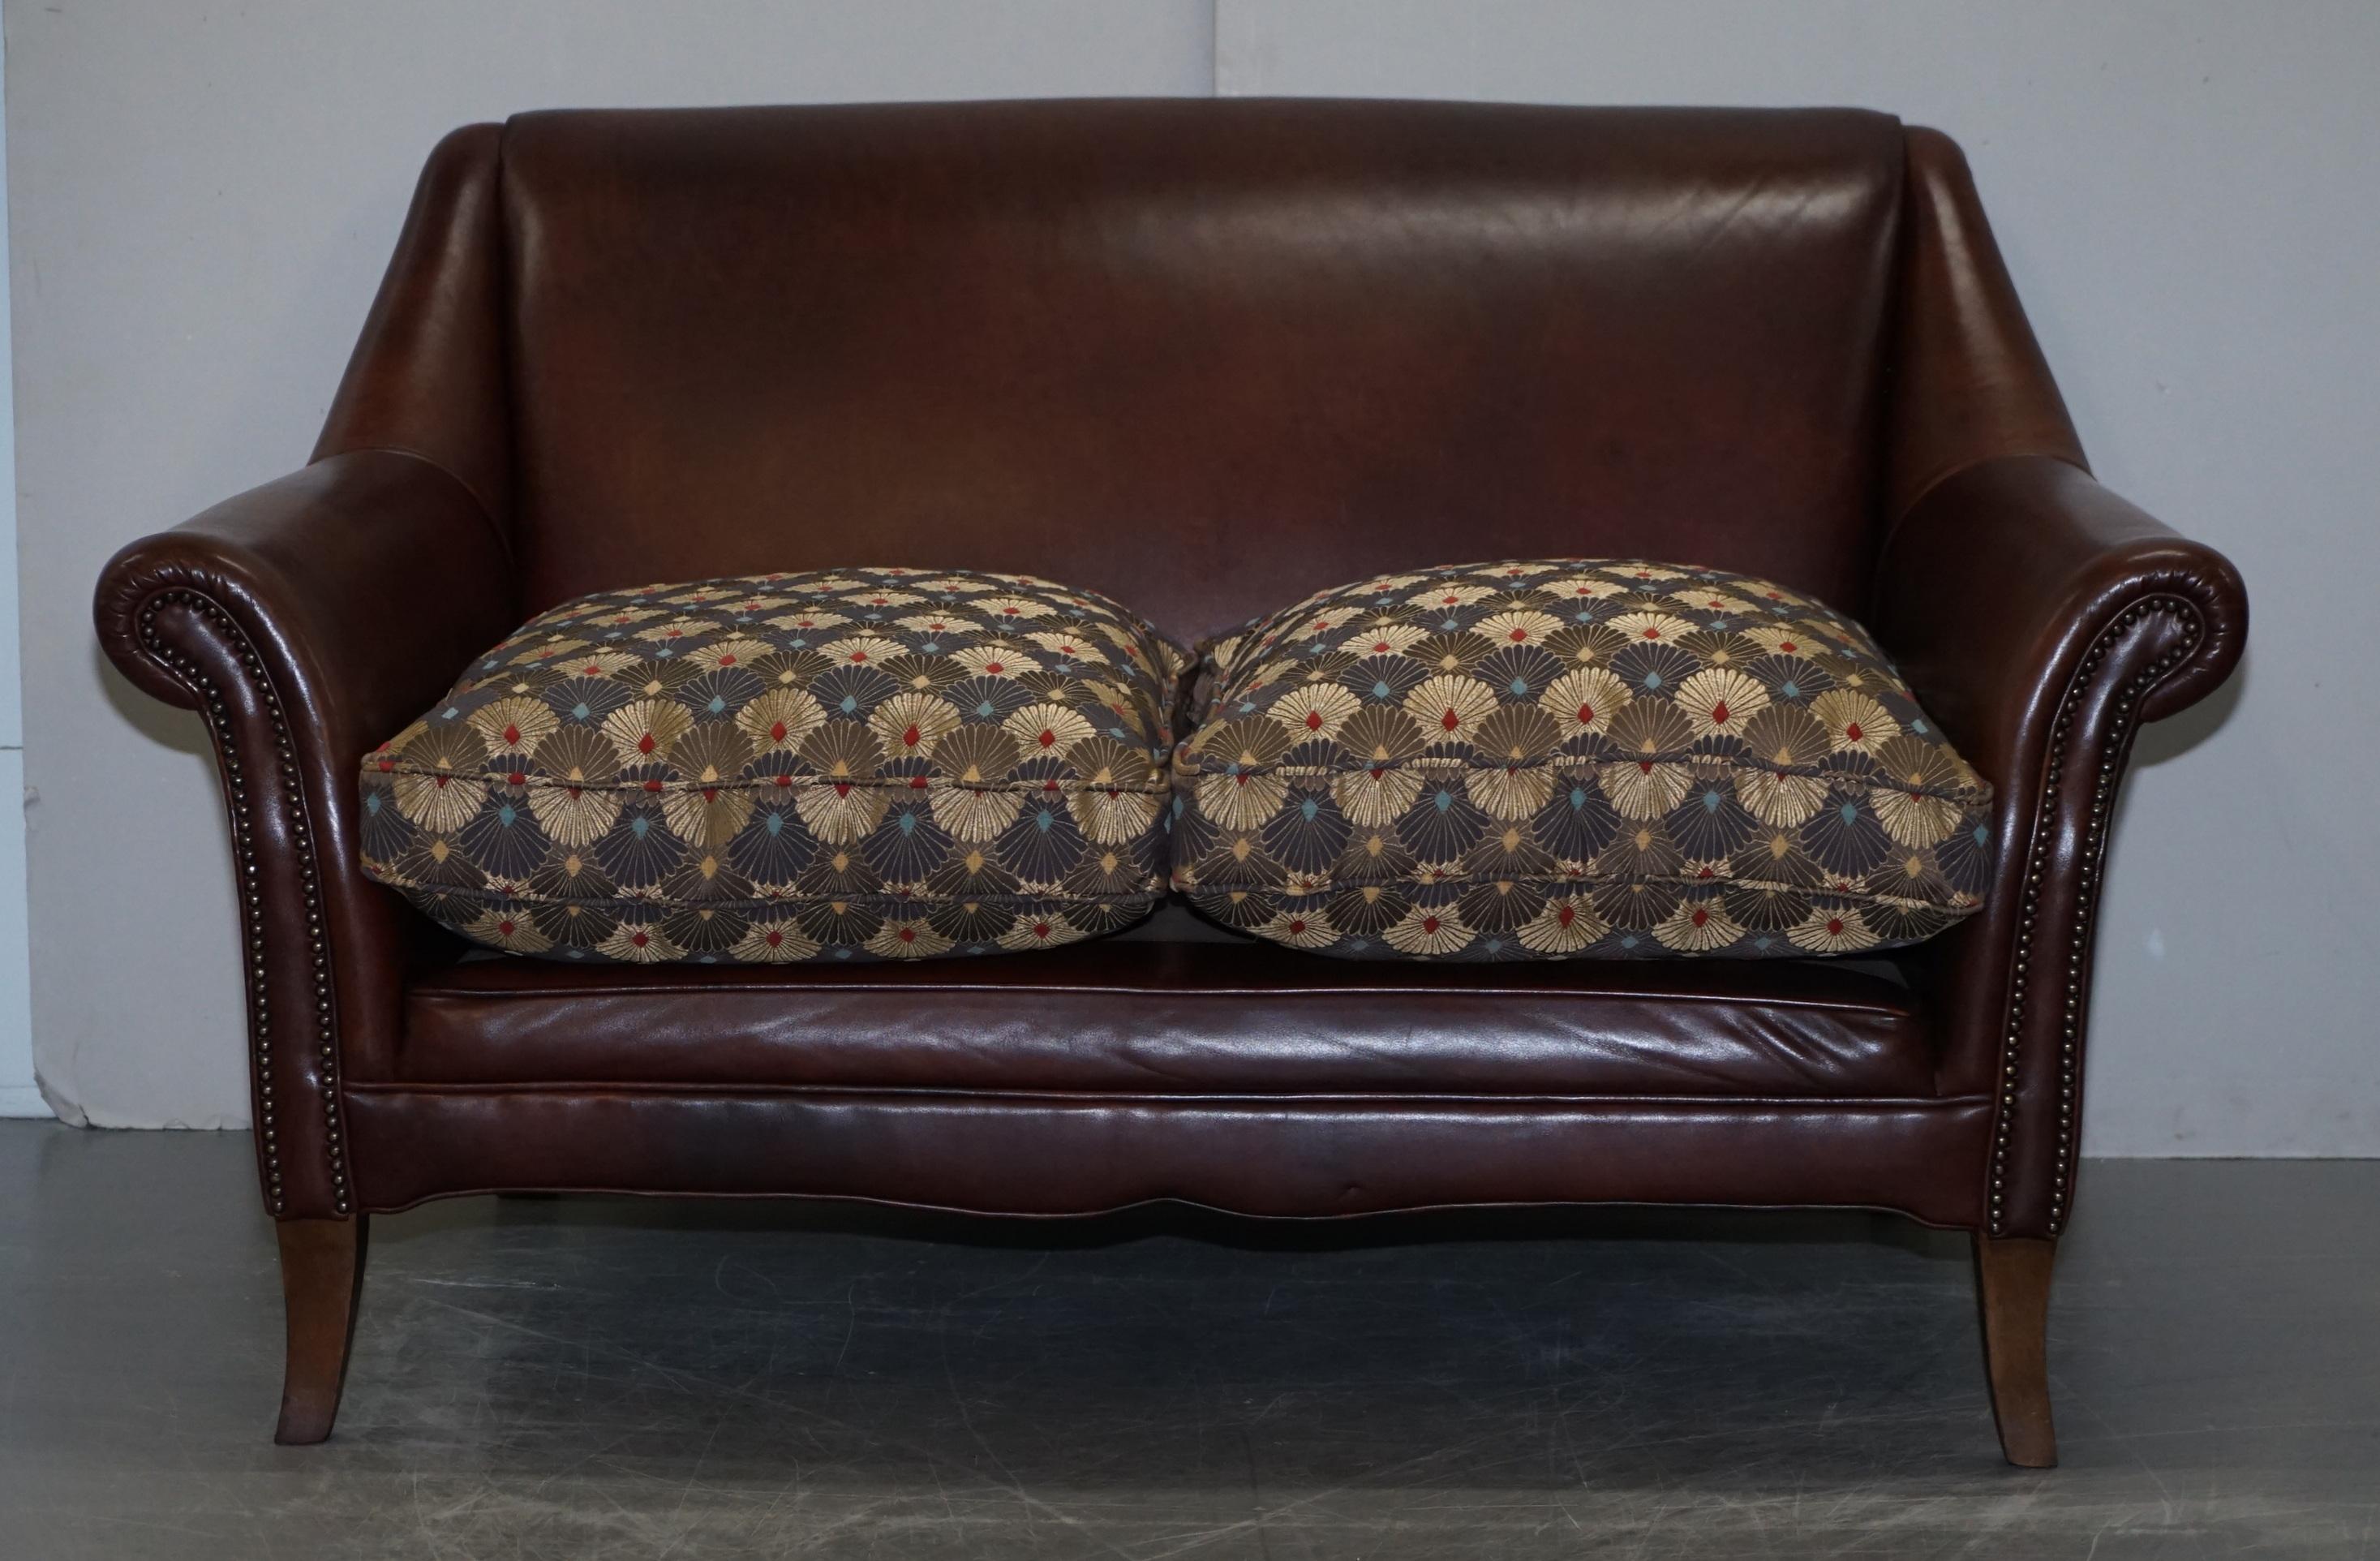 We are delighted to offer for sale this stunning hand made in England brown leather sofa with Liberty’s of London Peacock upholstery cushions

A very good looking comfortable and well made sofa. It has a high contemporary back, over stuffed